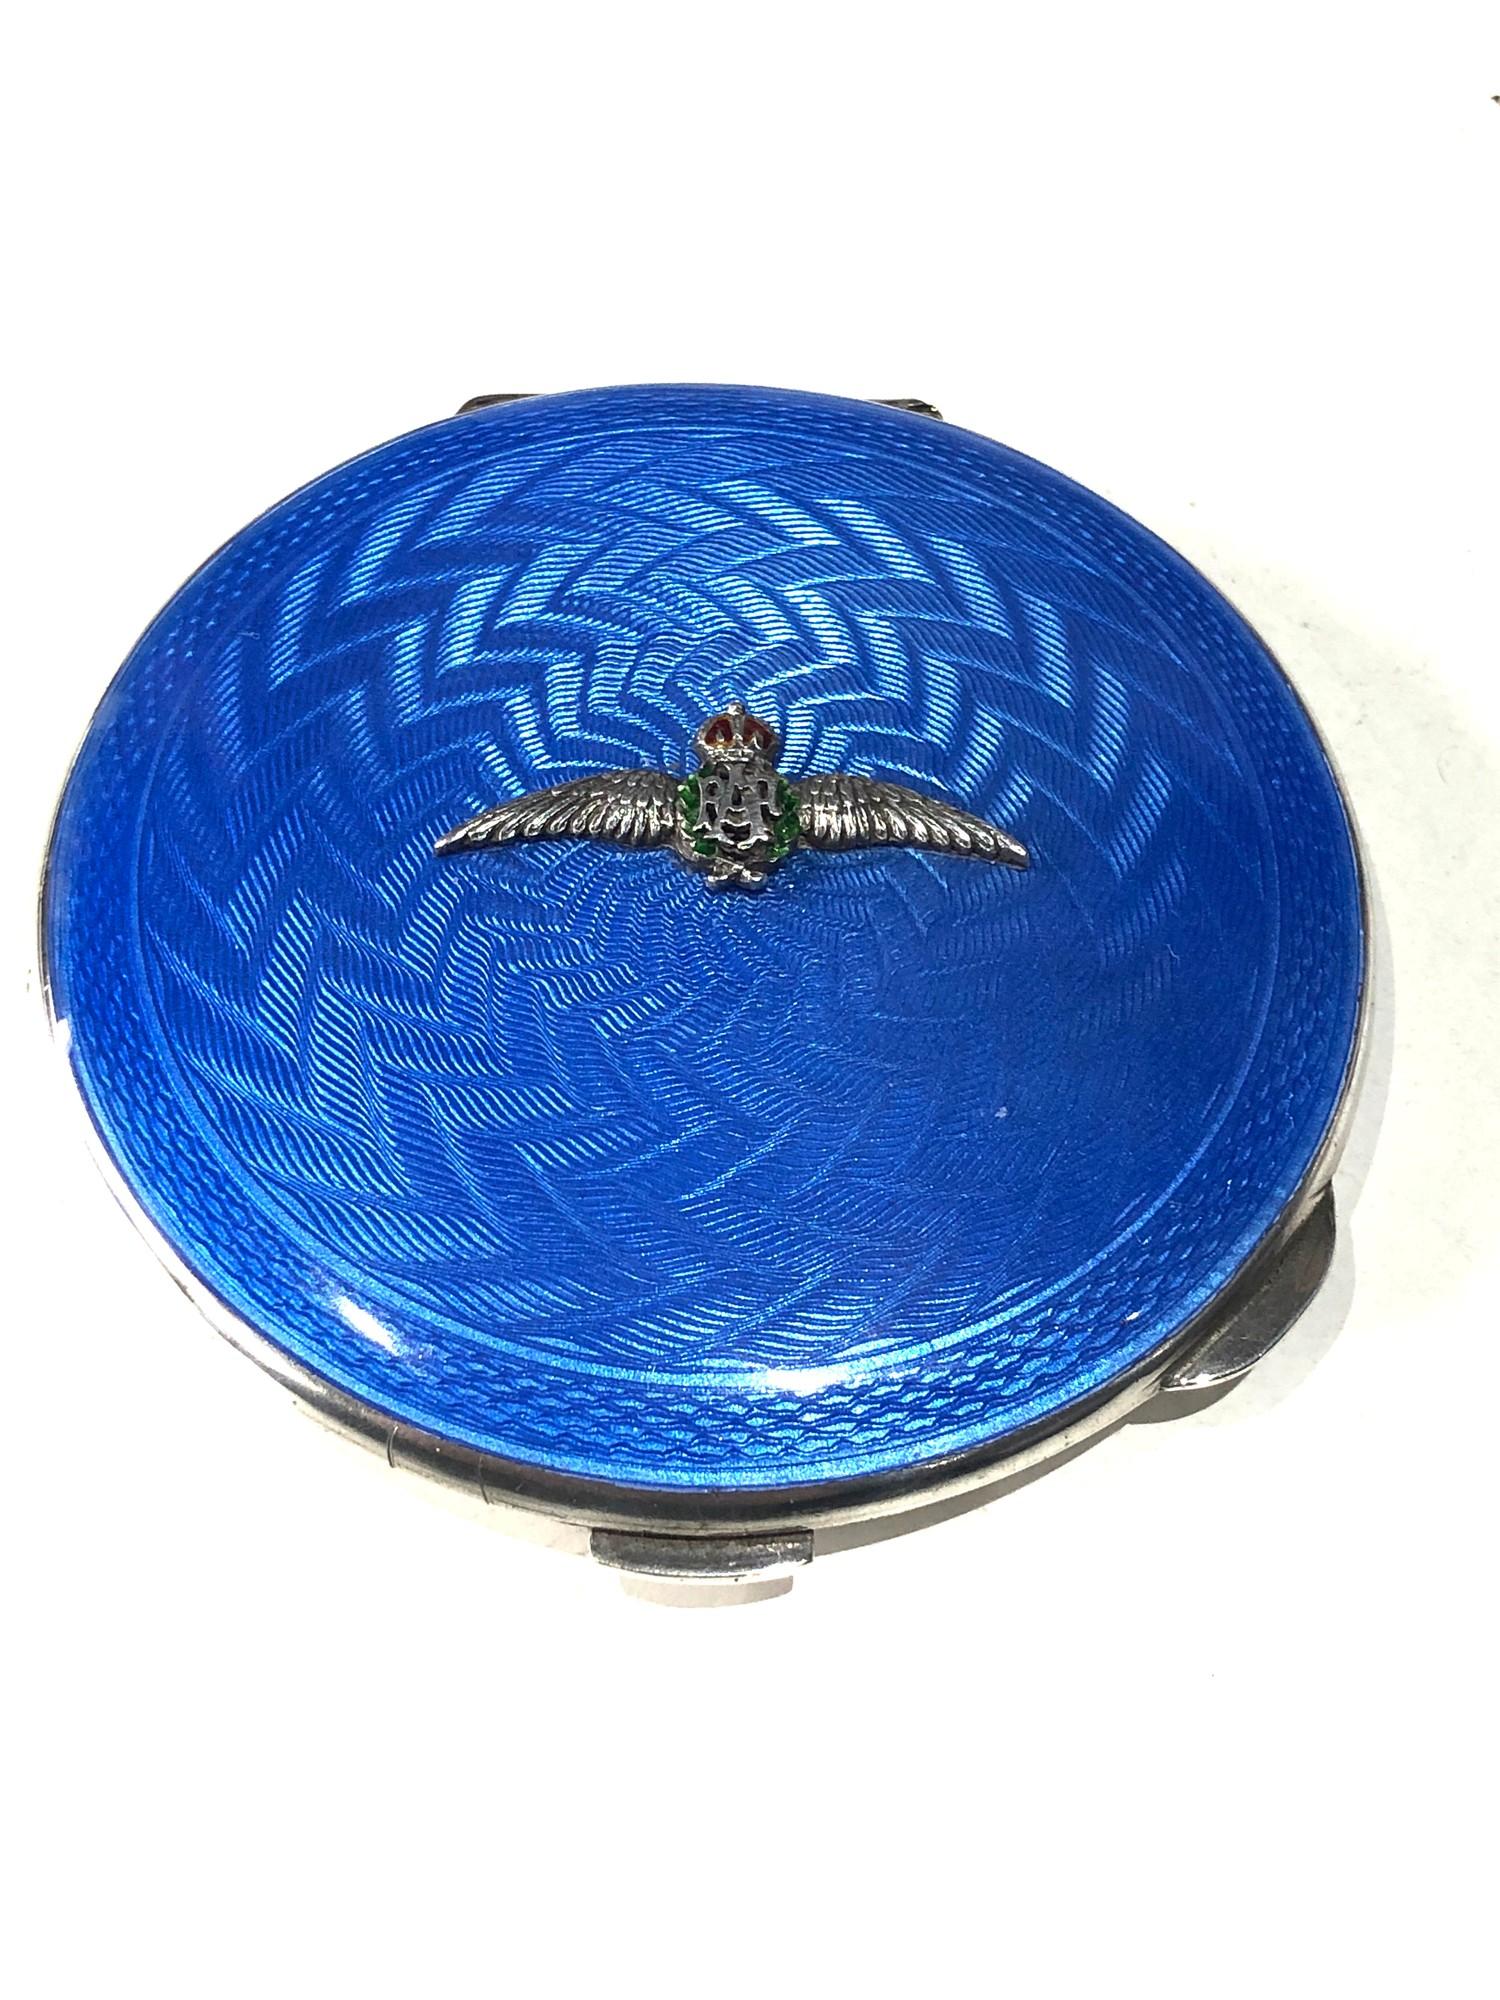 Fine Vintage silver and enamel R.A.F compact enamel in good condition interior glass cracked